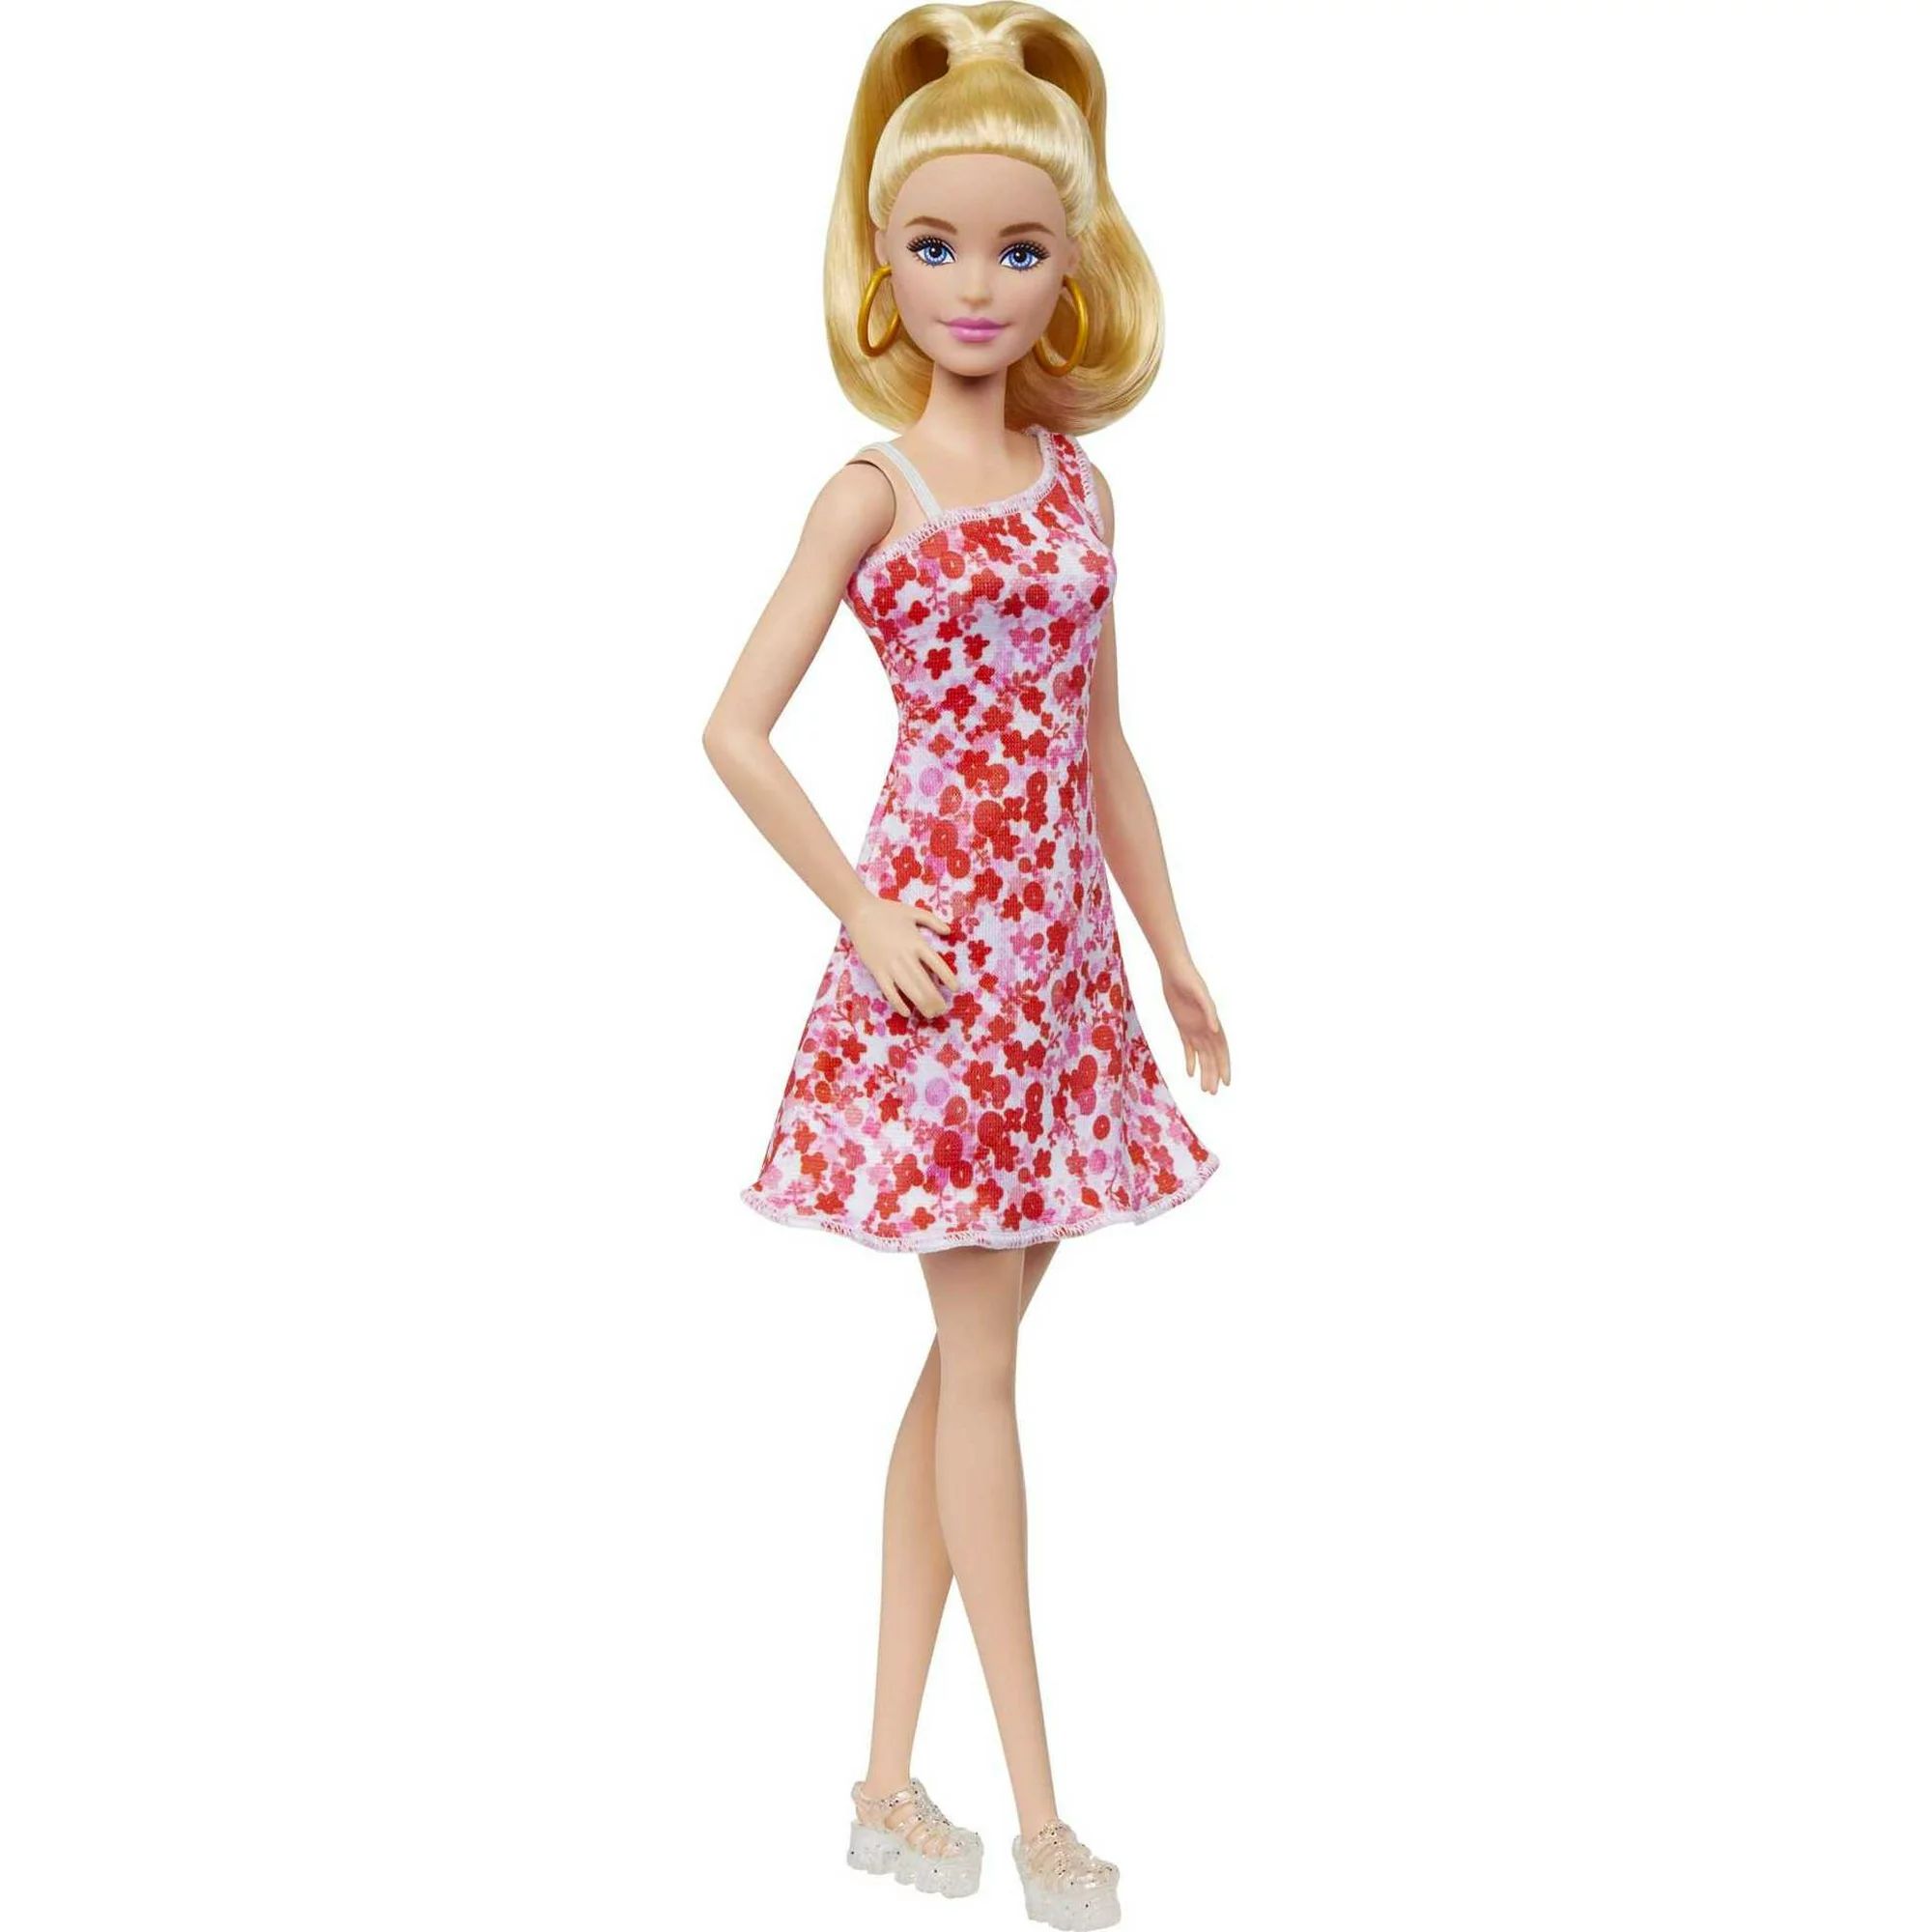 Barbie Fashionistas Doll #205 with Blond Ponytail and Floral Dress, Sandals and Hoop Earrings | Walmart (US)